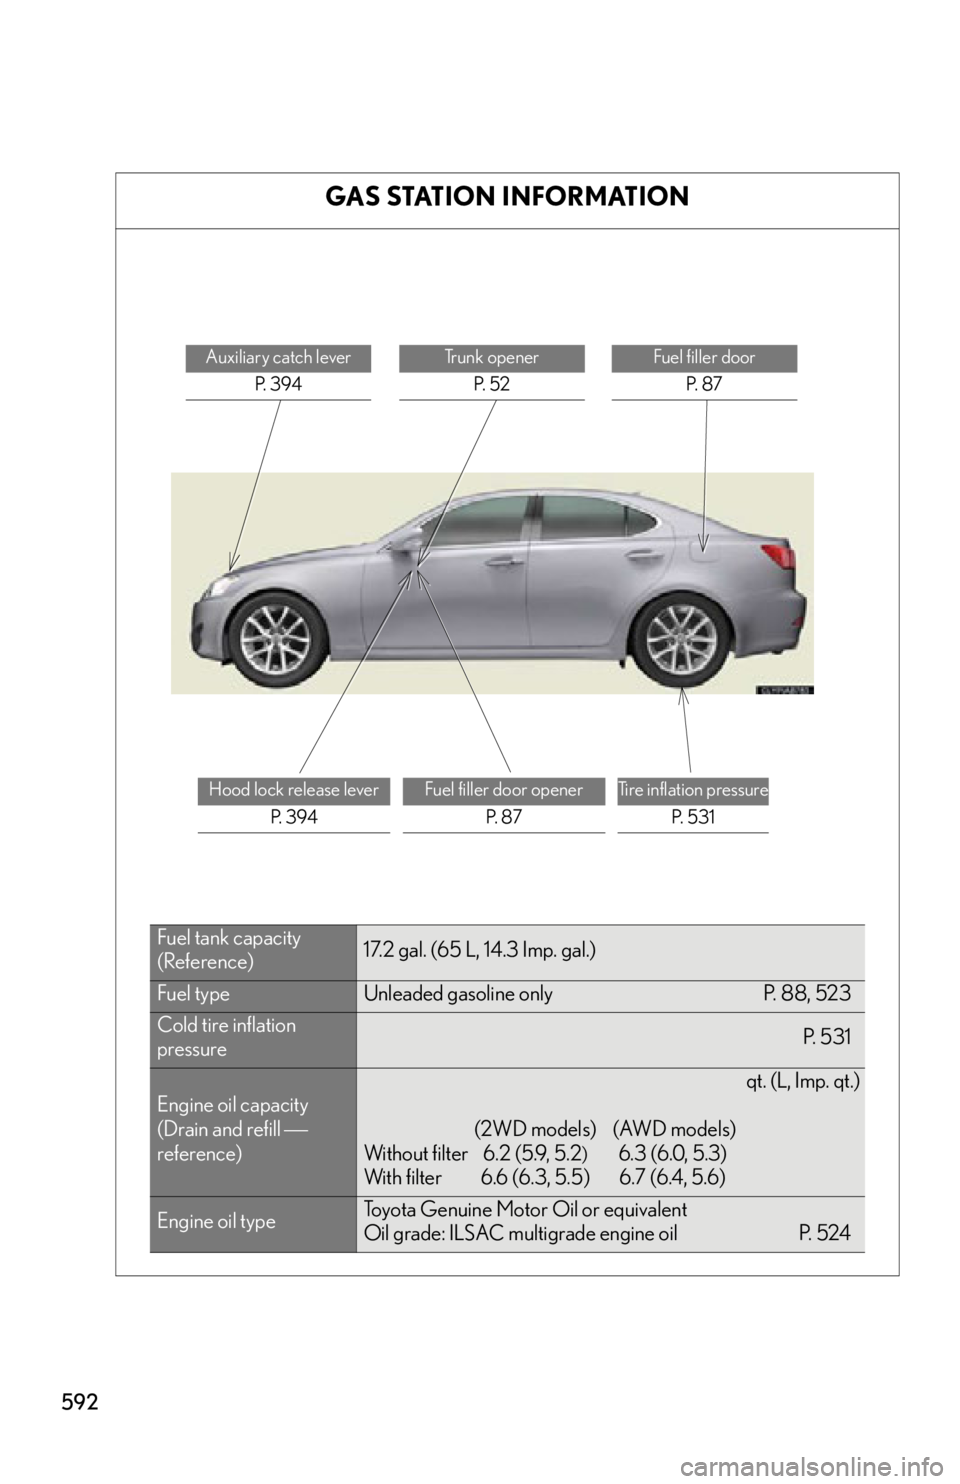 Lexus IS250 2012  Specifications / LEXUS 2012 IS250,IS350 OWNERS MANUAL (OM53A87U) 592
GAS STATION INFORMATION
Auxiliary catch leverP.  3 9 4Trunk openerP.  5 2Fuel filler door P.  8 7
Hood lock release lever P.  3 9 4Fuel filler door openerP.  8 7Tire inflation pressureP.  5 3 1
Fu